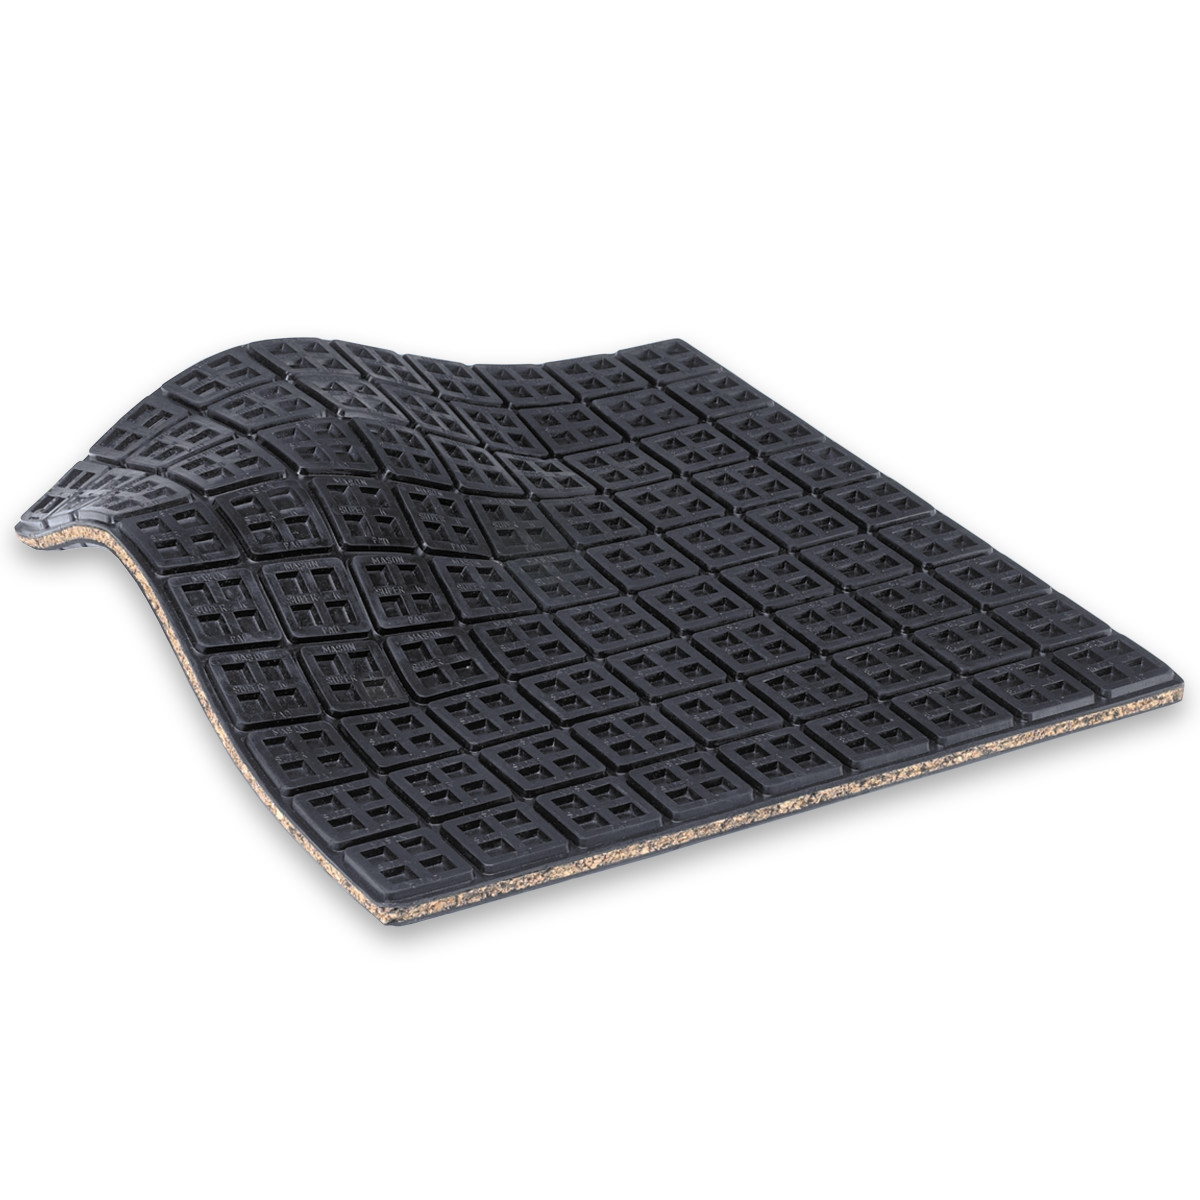 Rubber vibration isolation pads